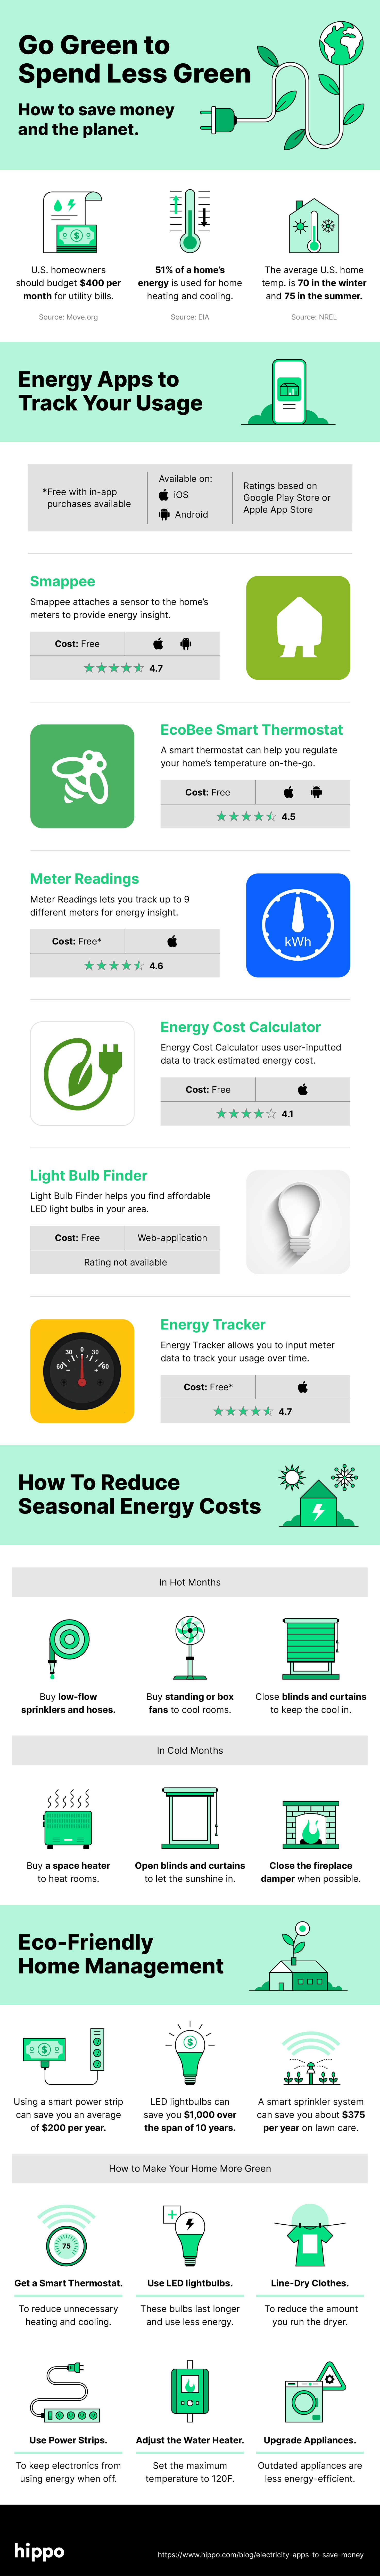 Go Green to Spend Less Green: 12 Electricity Apps to Track Your Usage